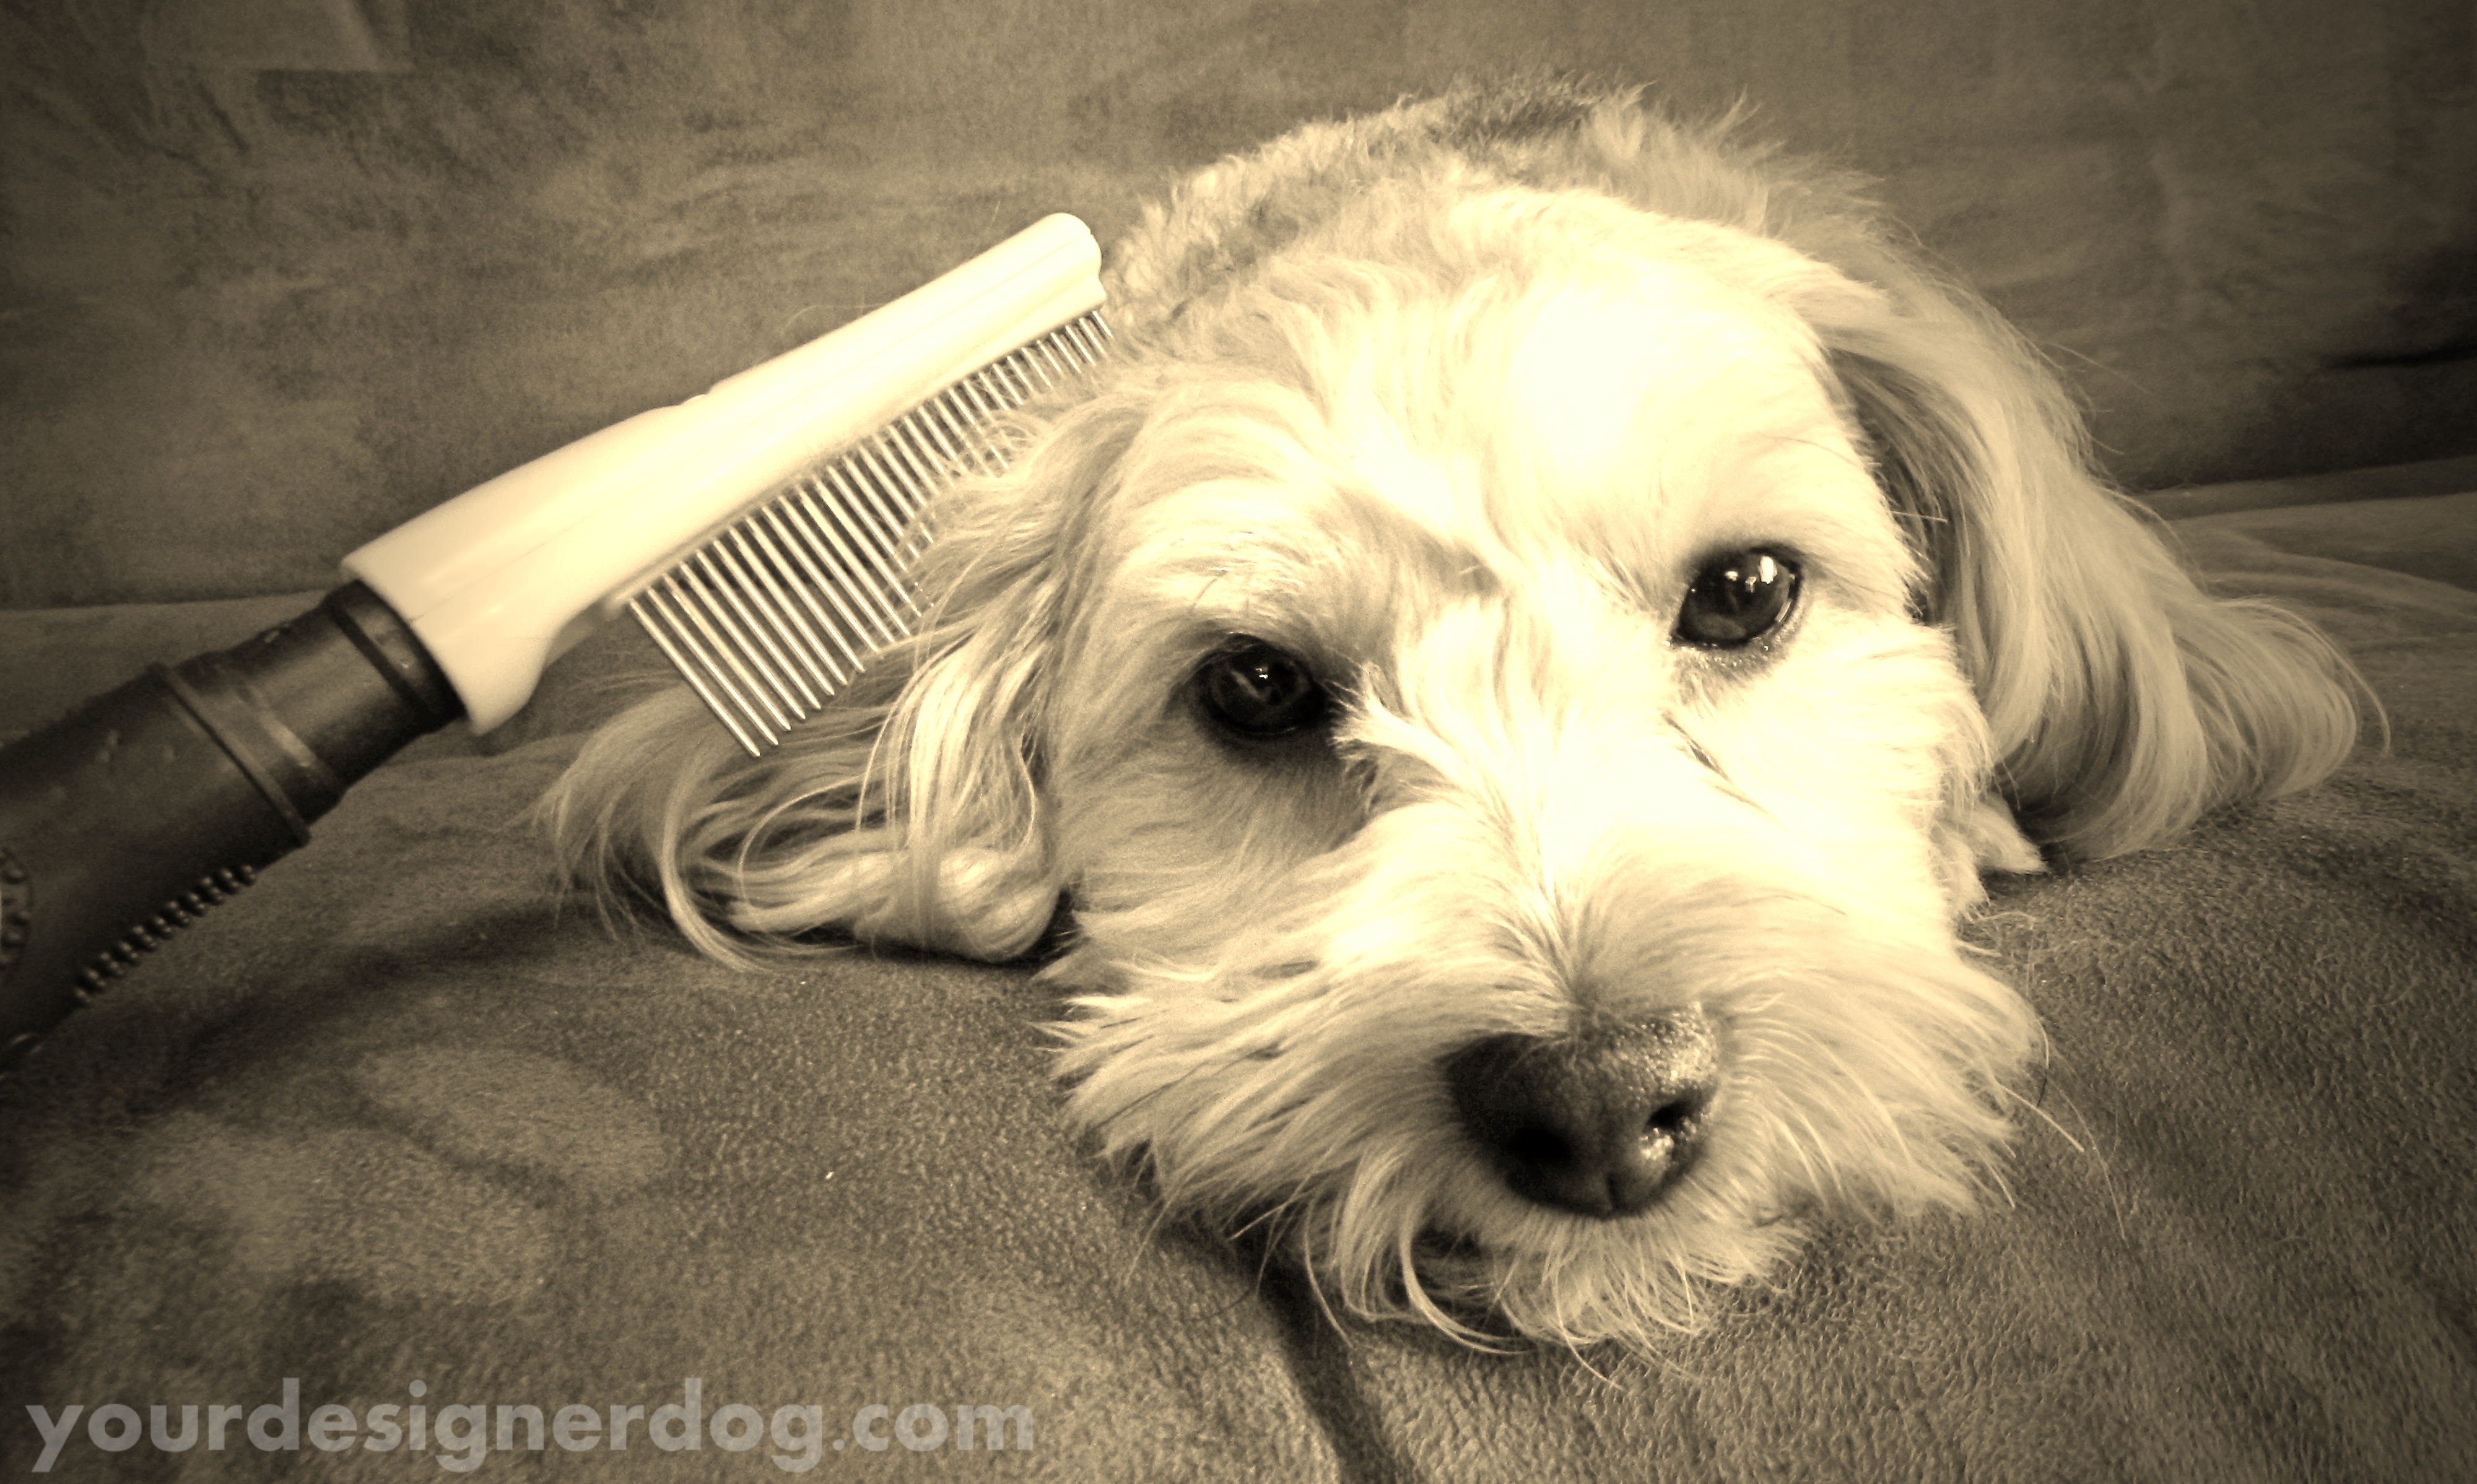 dogs, designer dogs, yorkipoo, yorkie poo, sepia photography, dog grooming, comb